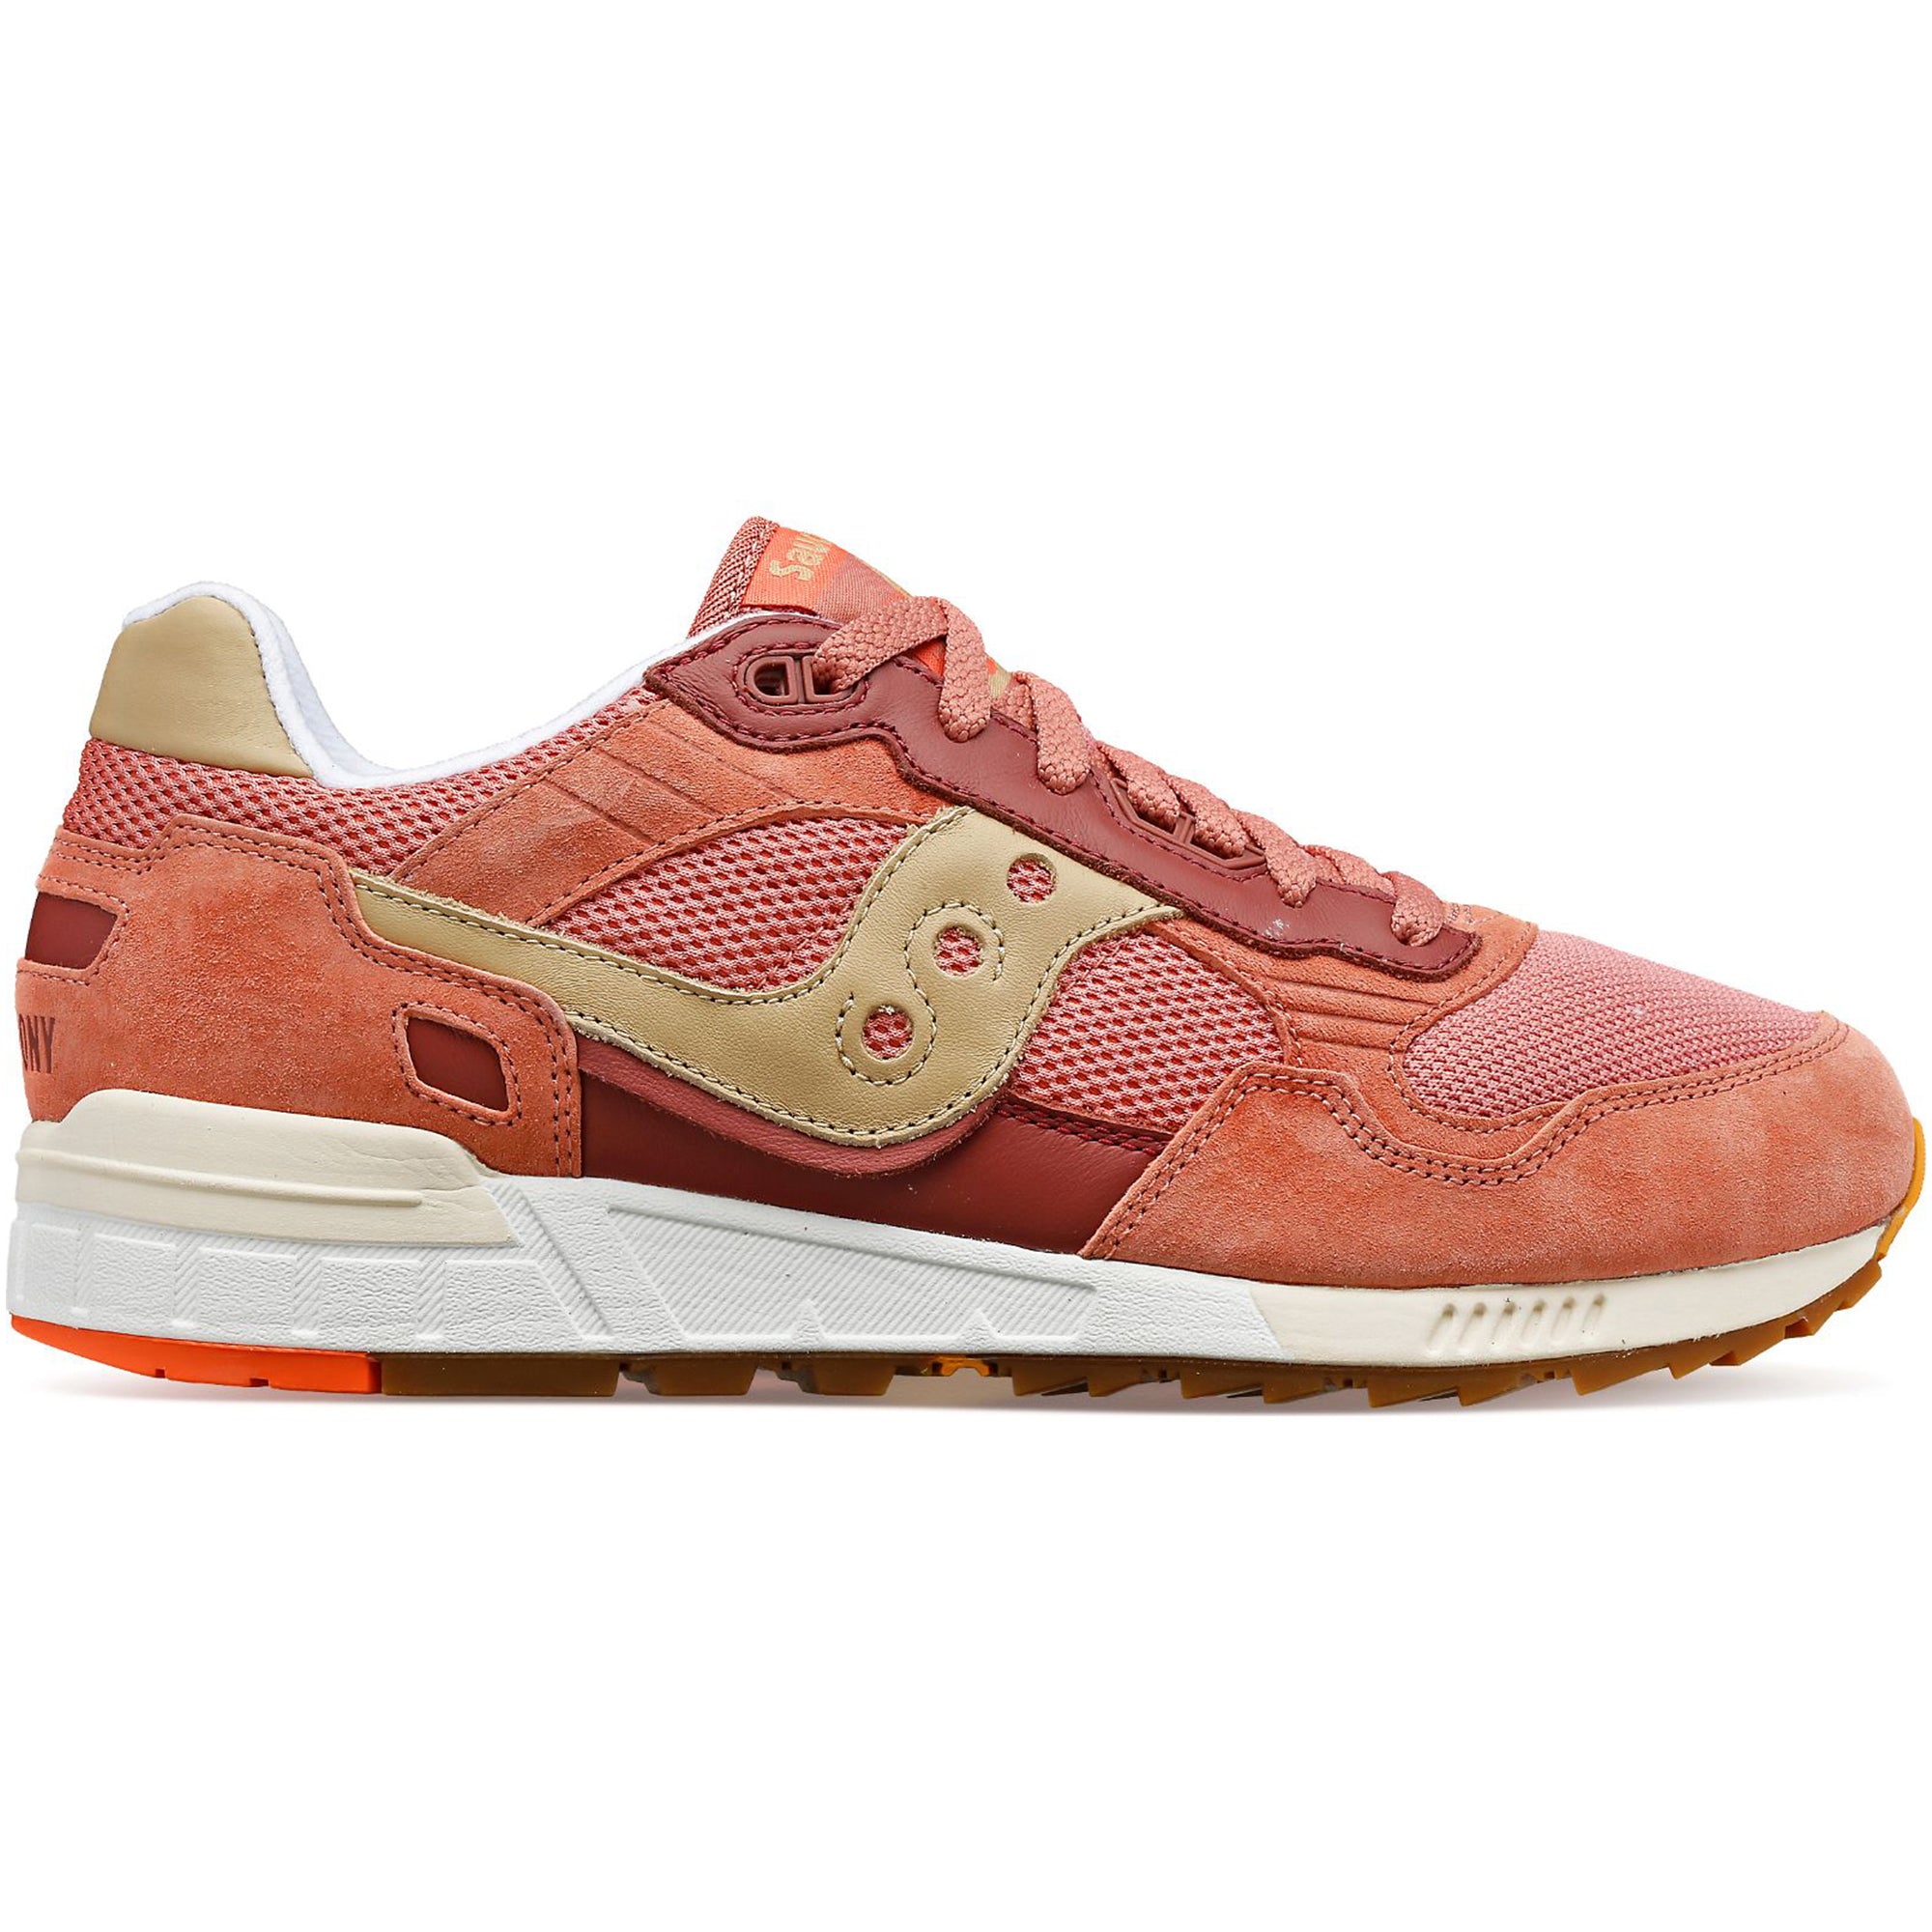 Saucony Shadow 5000 Premium Pack Trainers - Coral/Tan